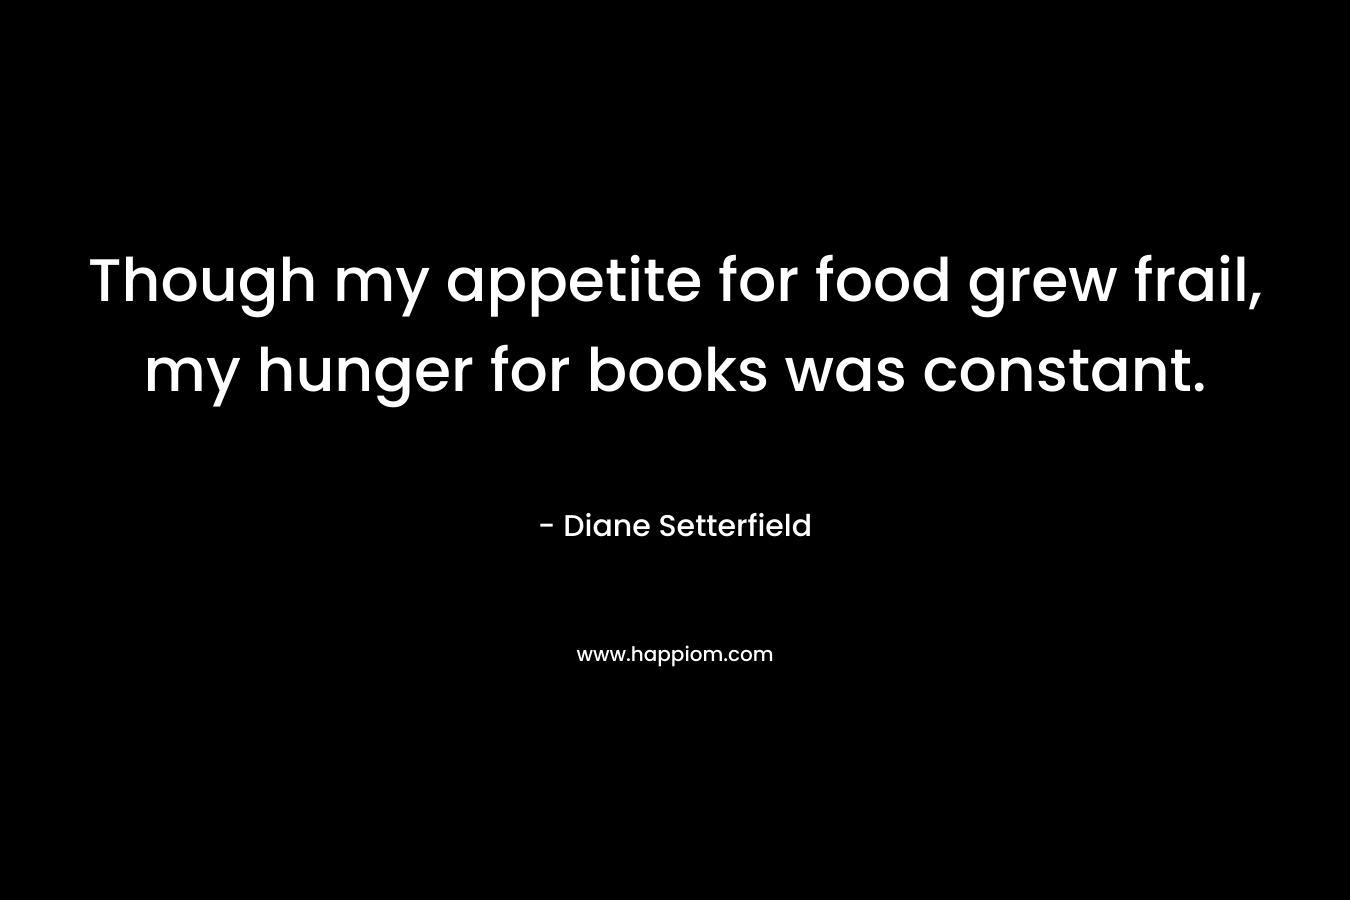 Though my appetite for food grew frail, my hunger for books was constant.